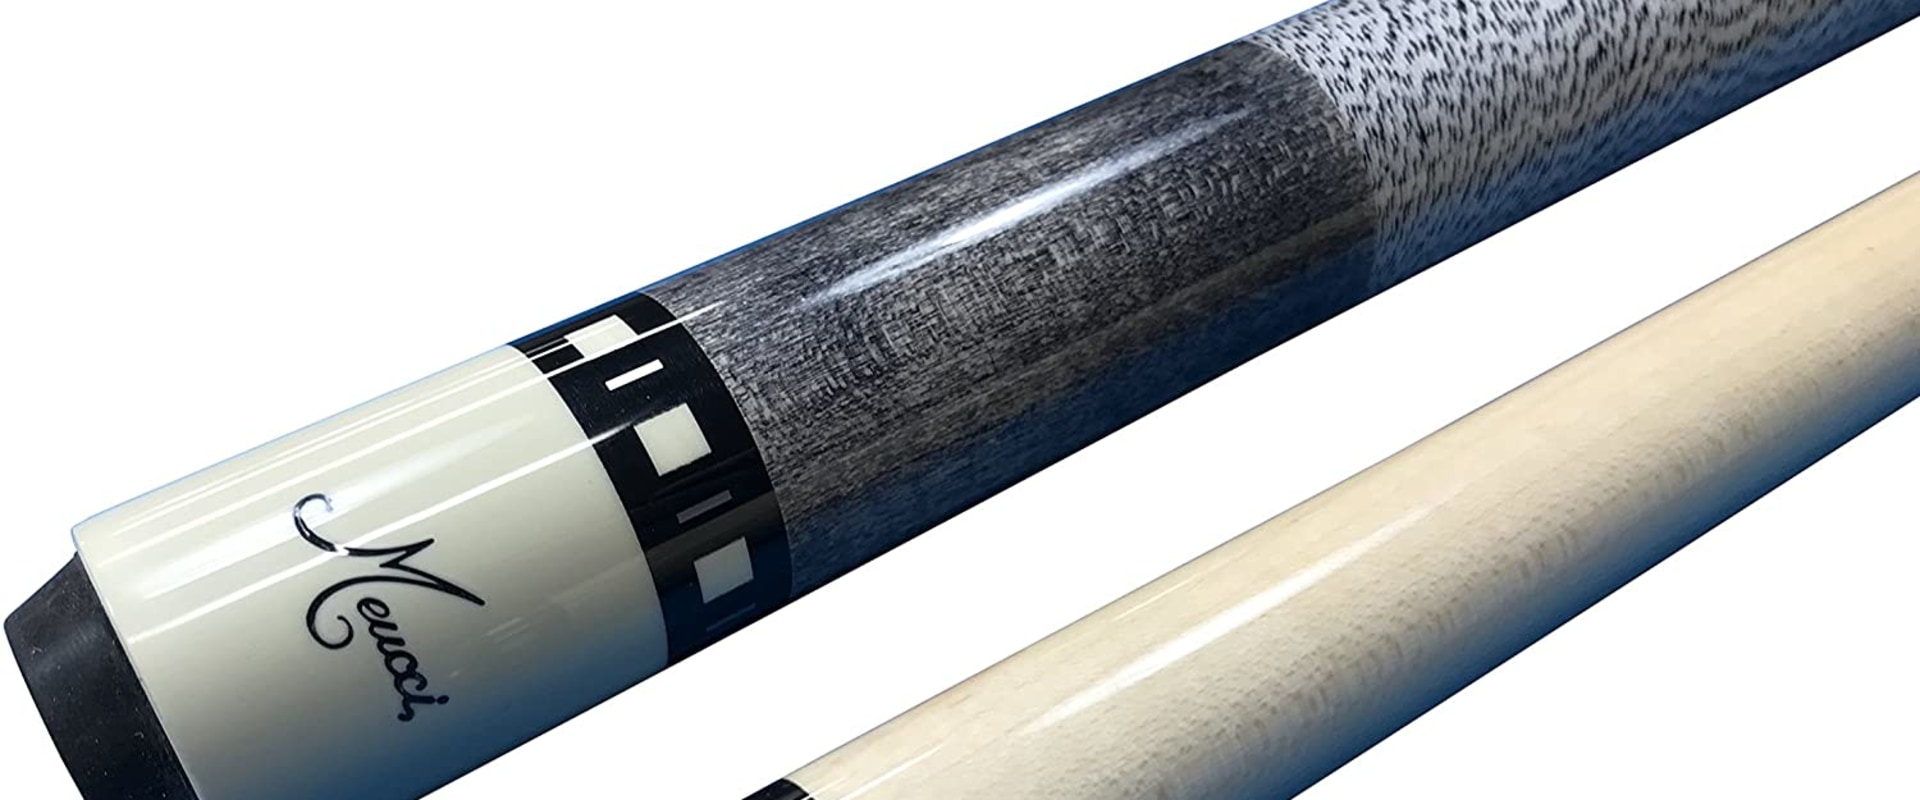 Where to buy pool cue for sale?